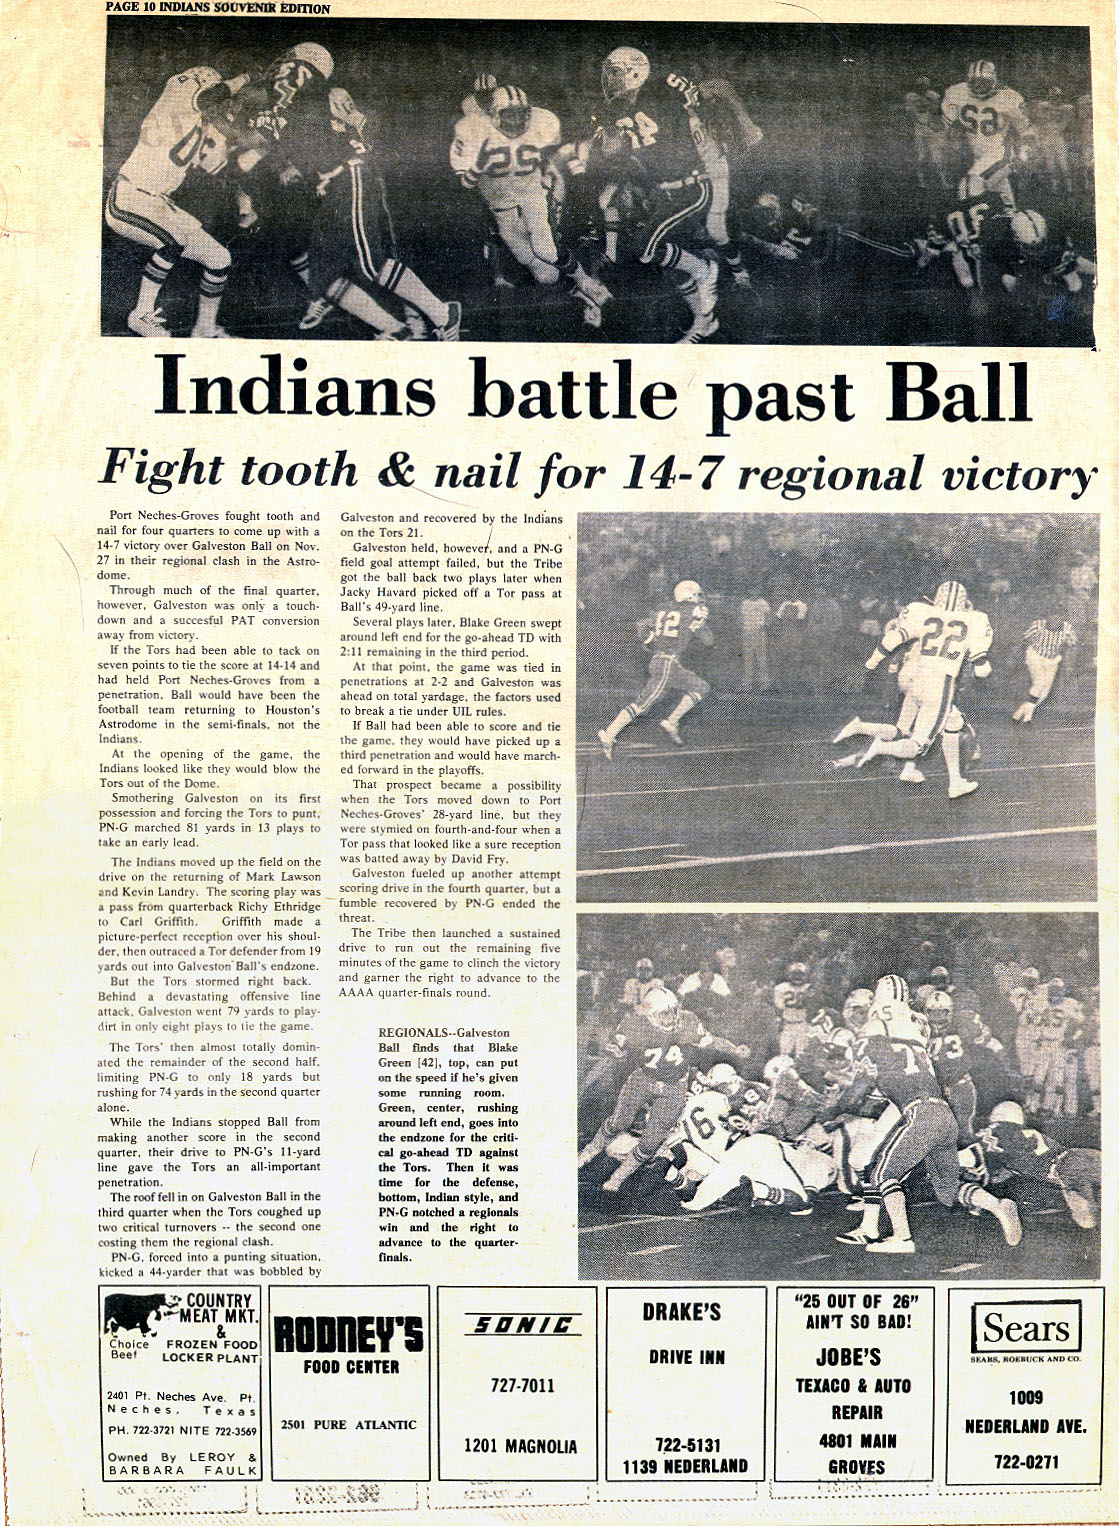 1976 Football: Bill Snelling Collection - PN-G Indians Football